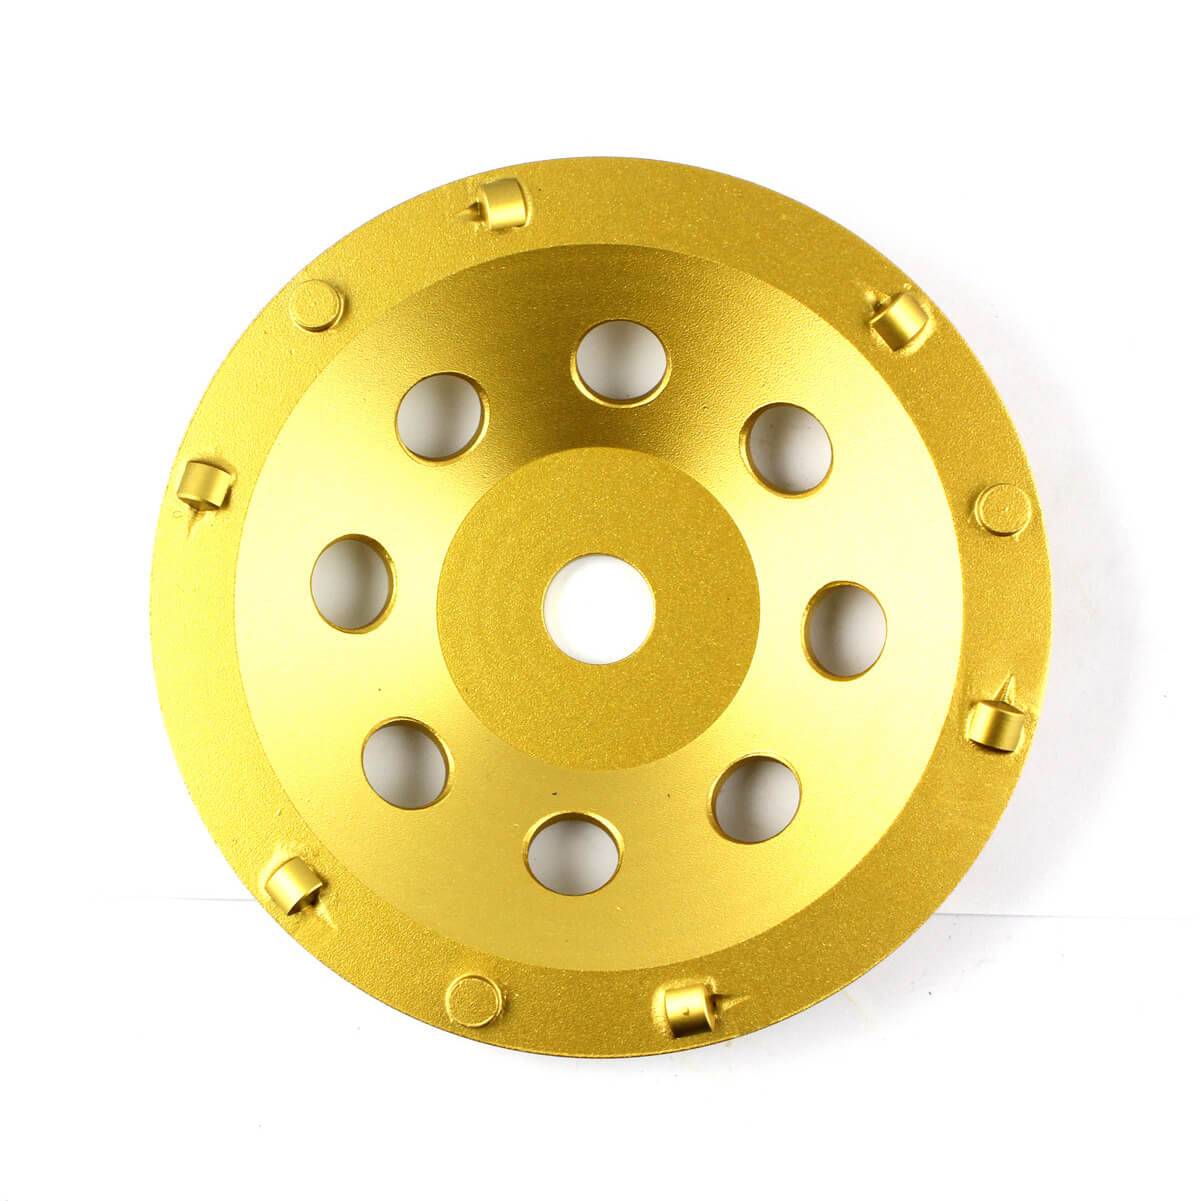 Epoxy Coating Removal Abrasive Stone Diamond PCD Cup Grinding Wheel JD6-2-7 Featured Image